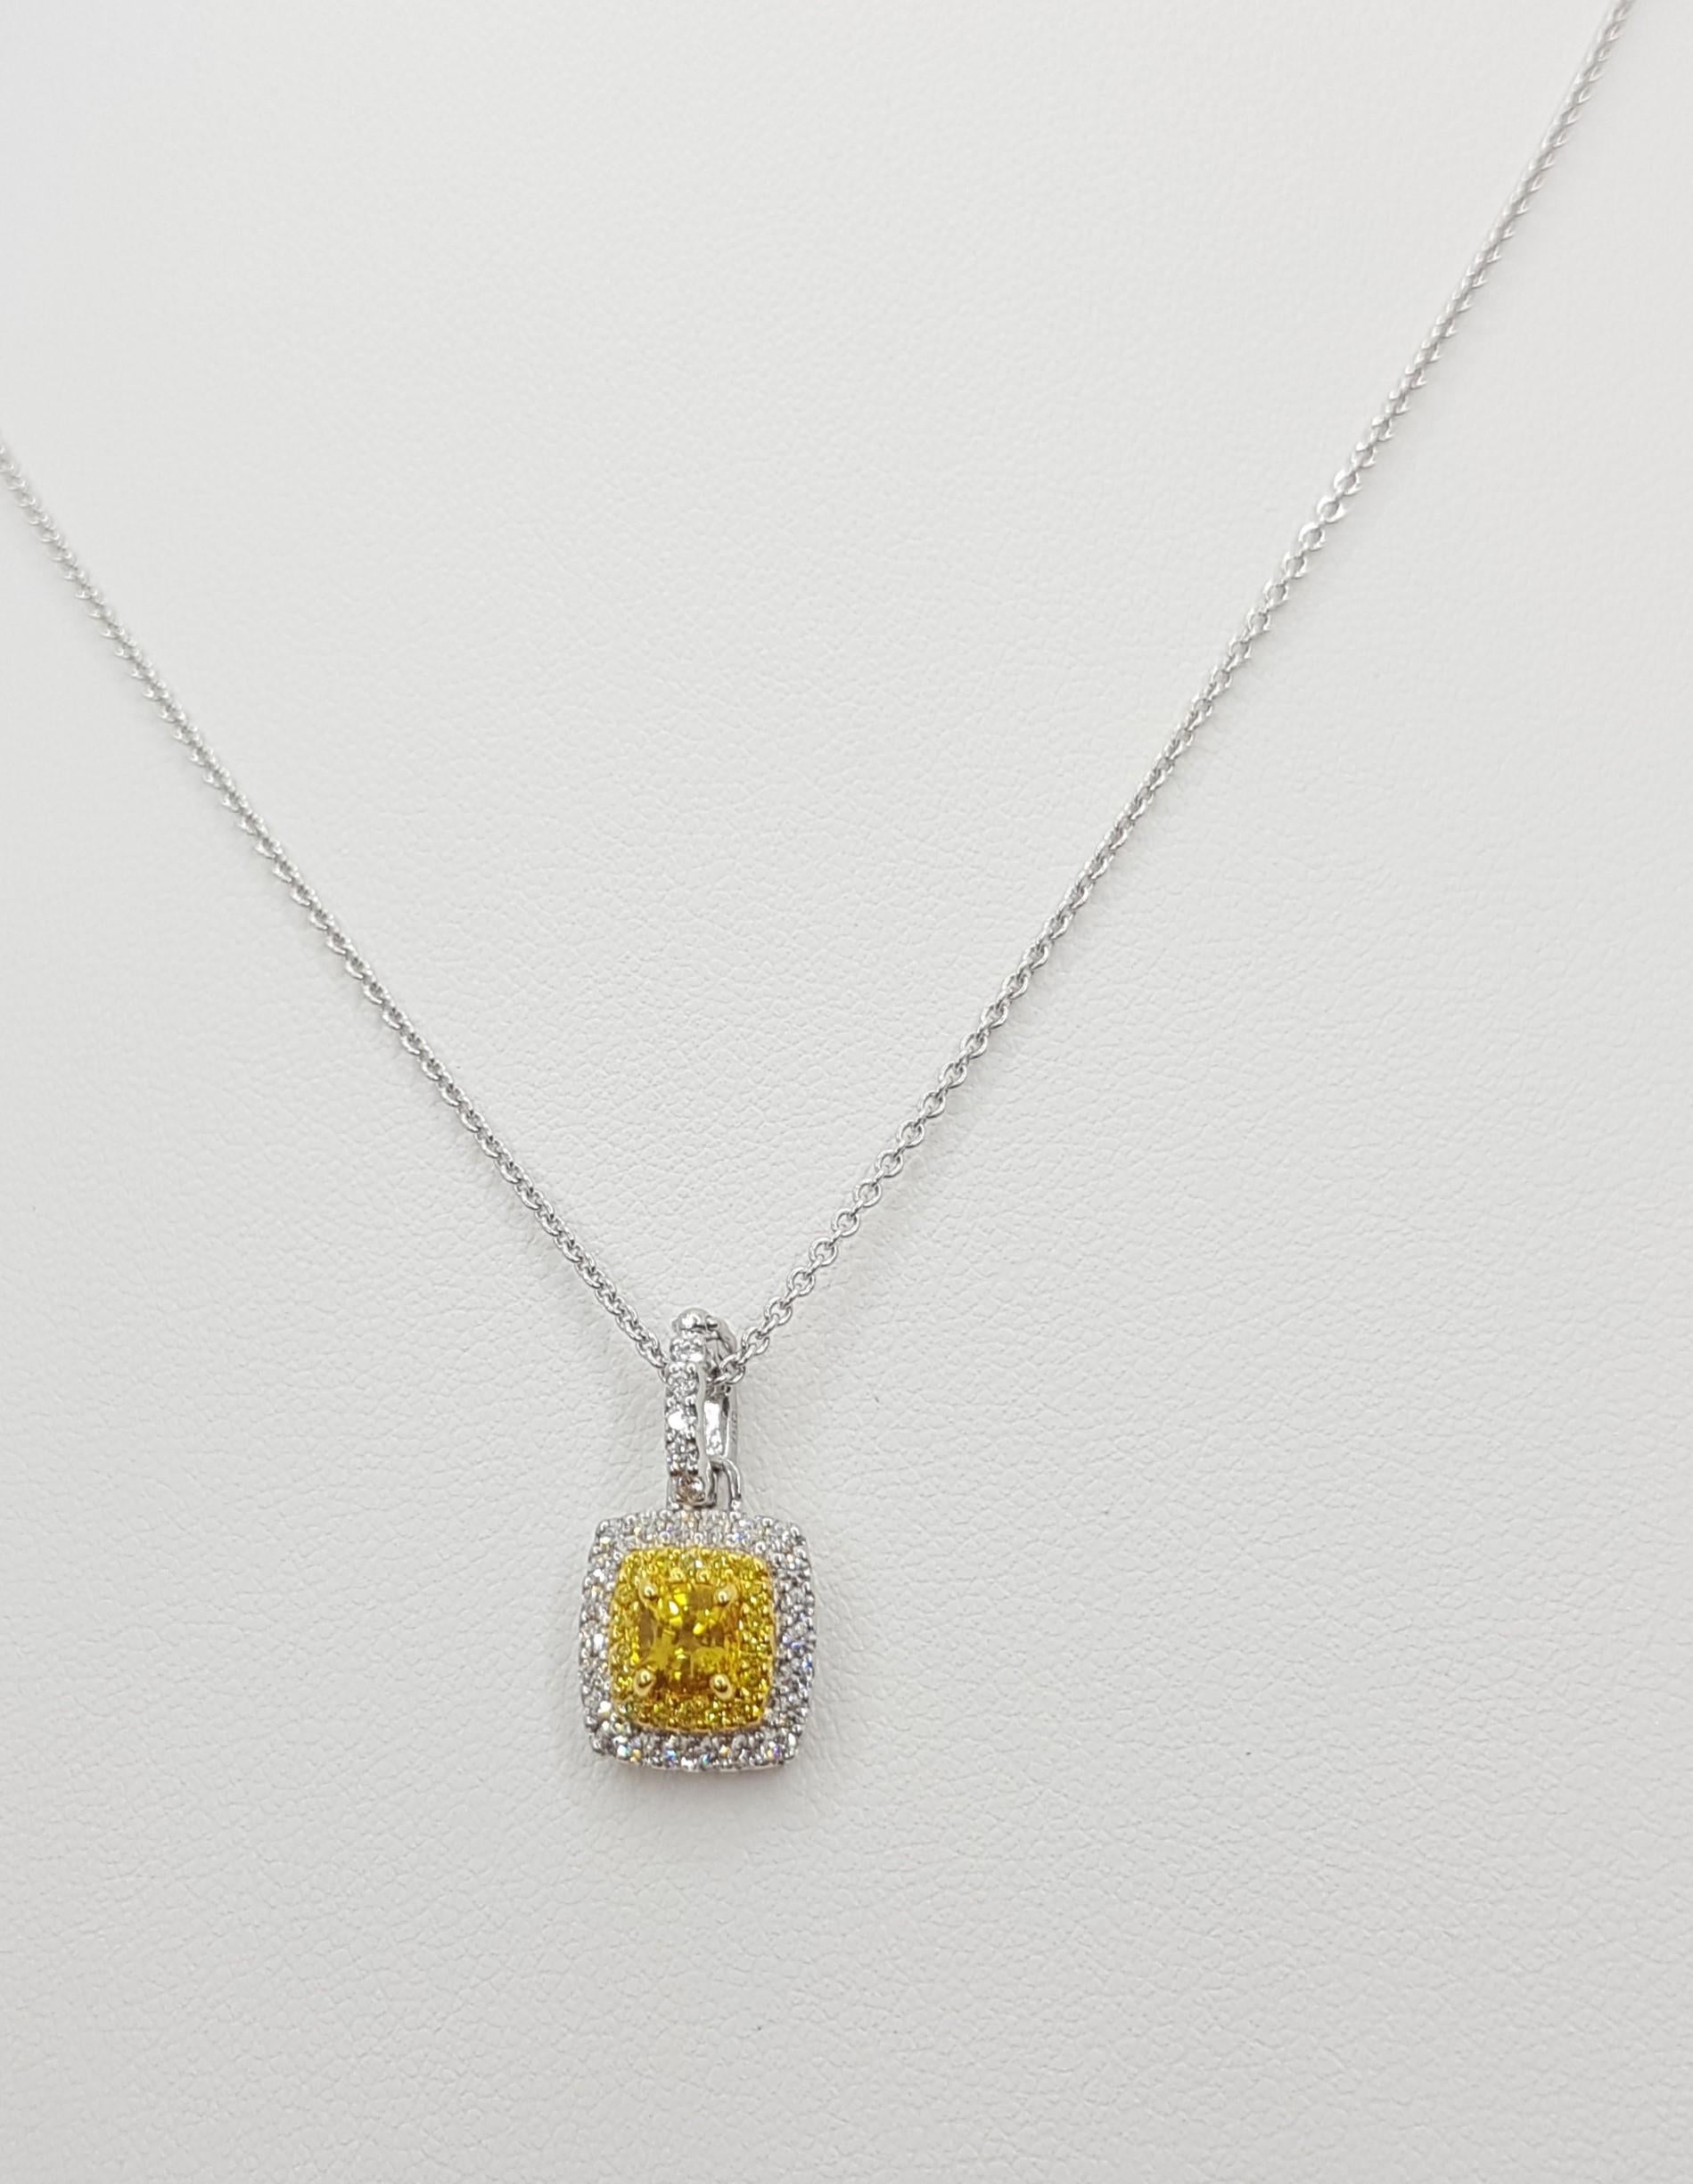 Yellow Sapphire 0.60 carat with Diamond 0.28 carat and Yellow Diamond 0.09 carat Pendant set in 18 Karat White Gold Settings
(chain not included)

Width: 1.0 cm 
Length: 1.9 cm
Total Weight: 2.58 grams

